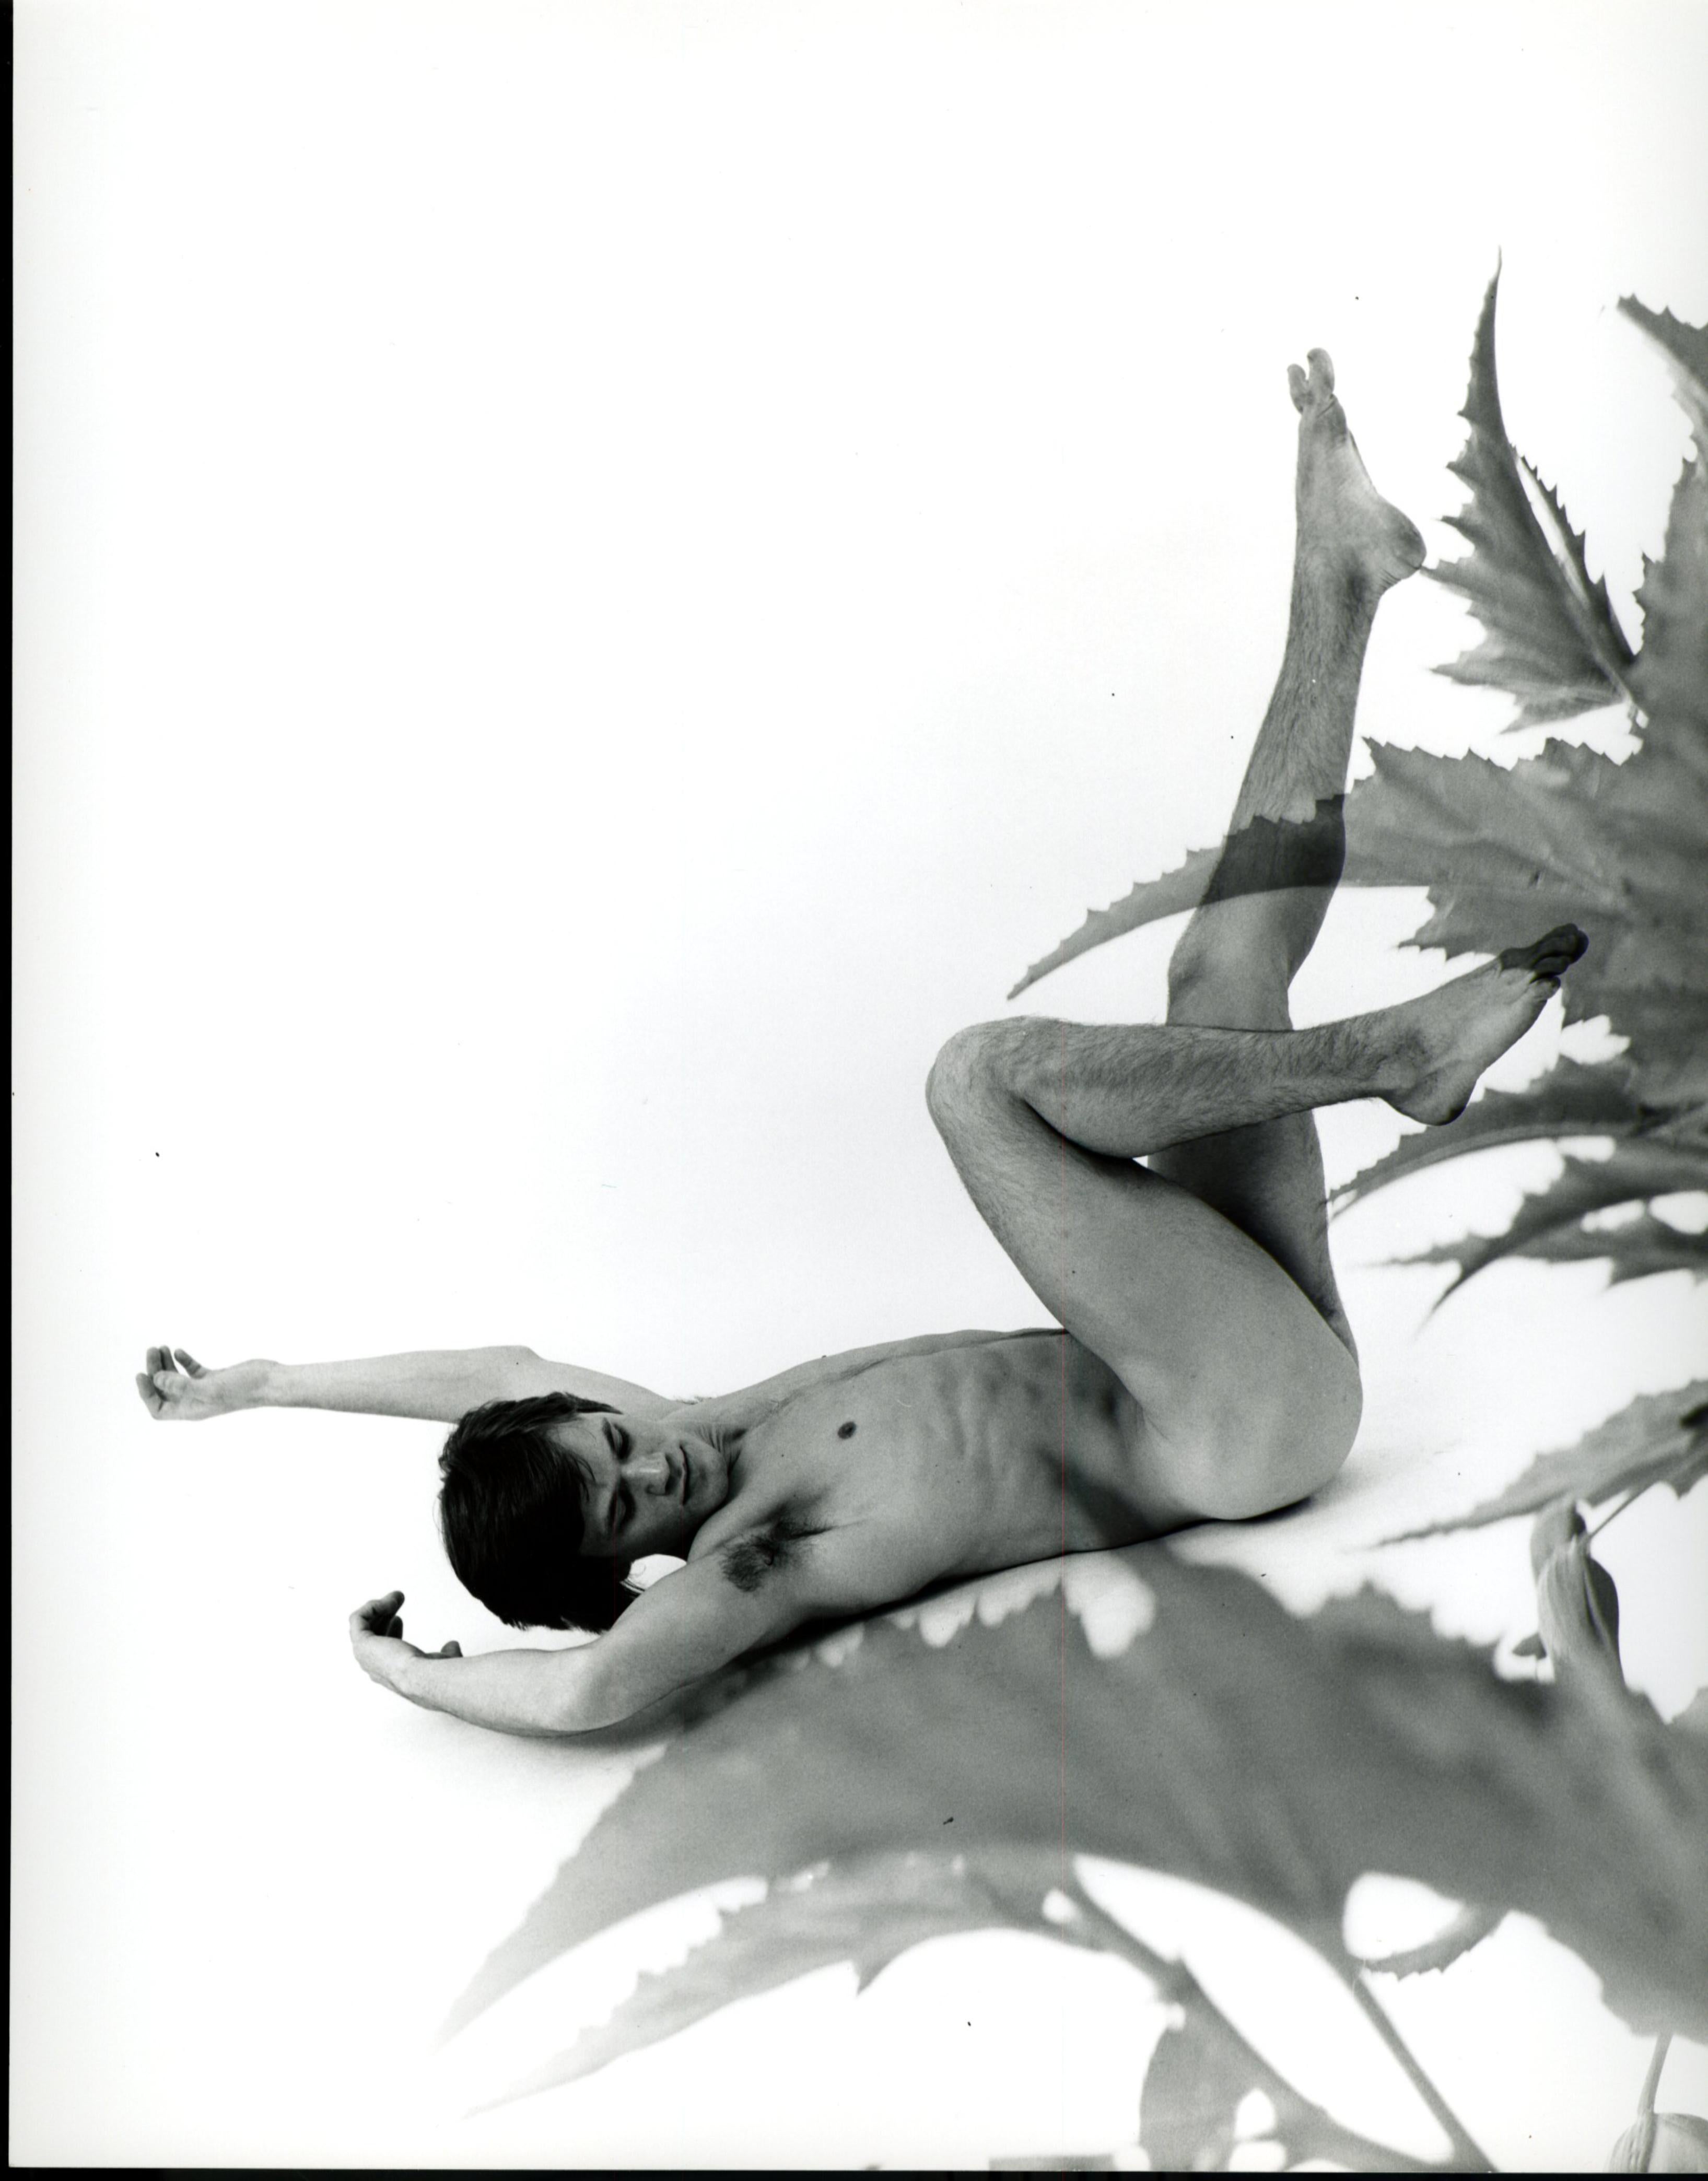 Jack Mitchell Black and White Photograph - Nude male model multiple exposure with plant leaves